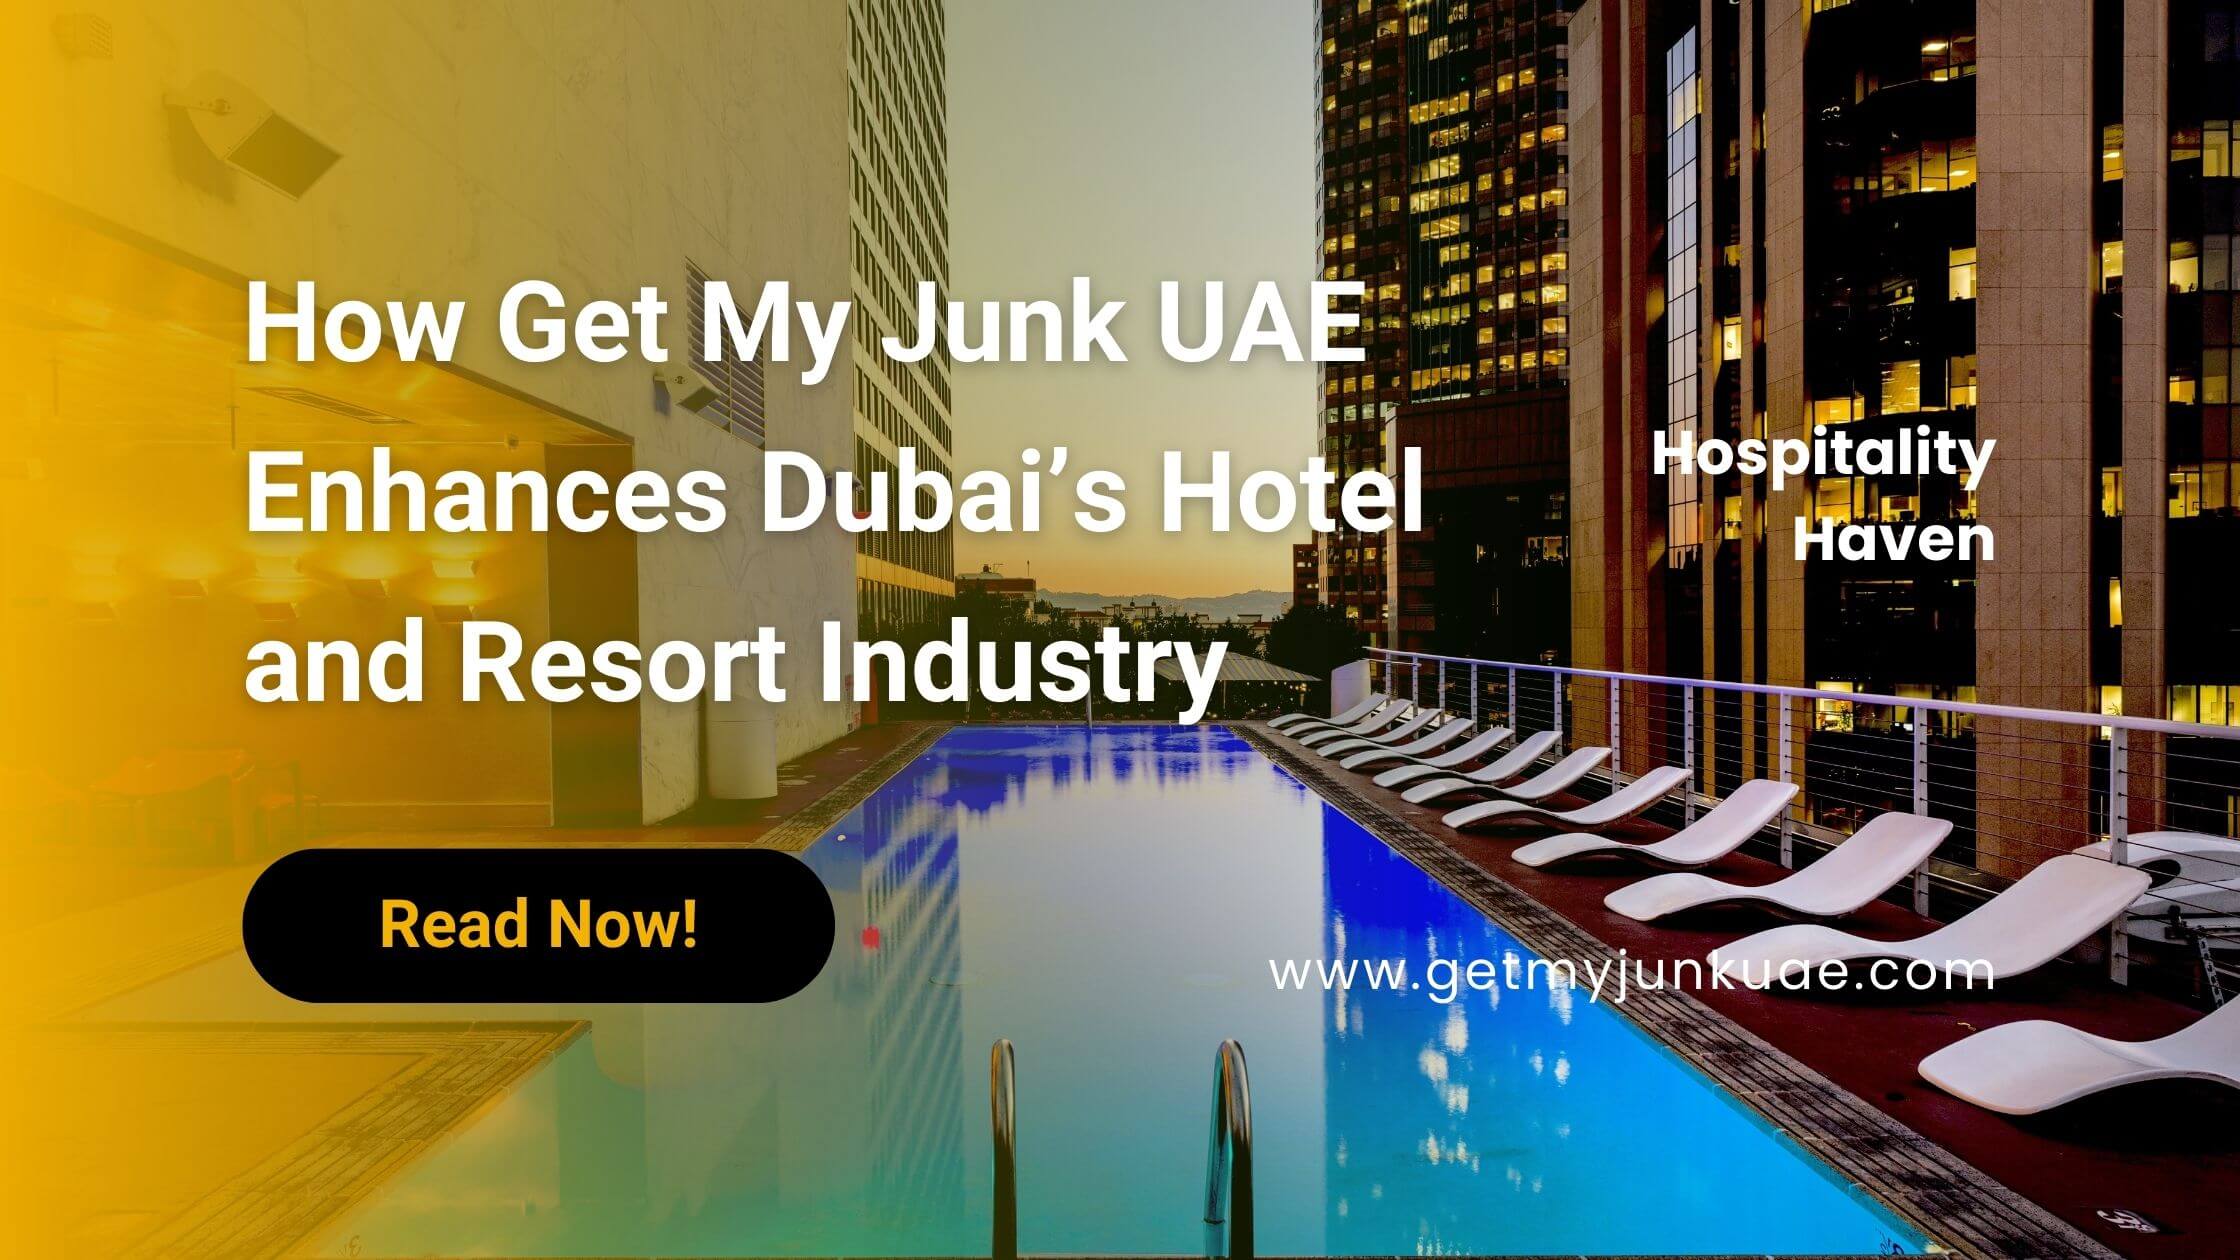 Hospitality Haven: How Get My Junk UAE Enhances Dubai’s Hotel and Resort Industry